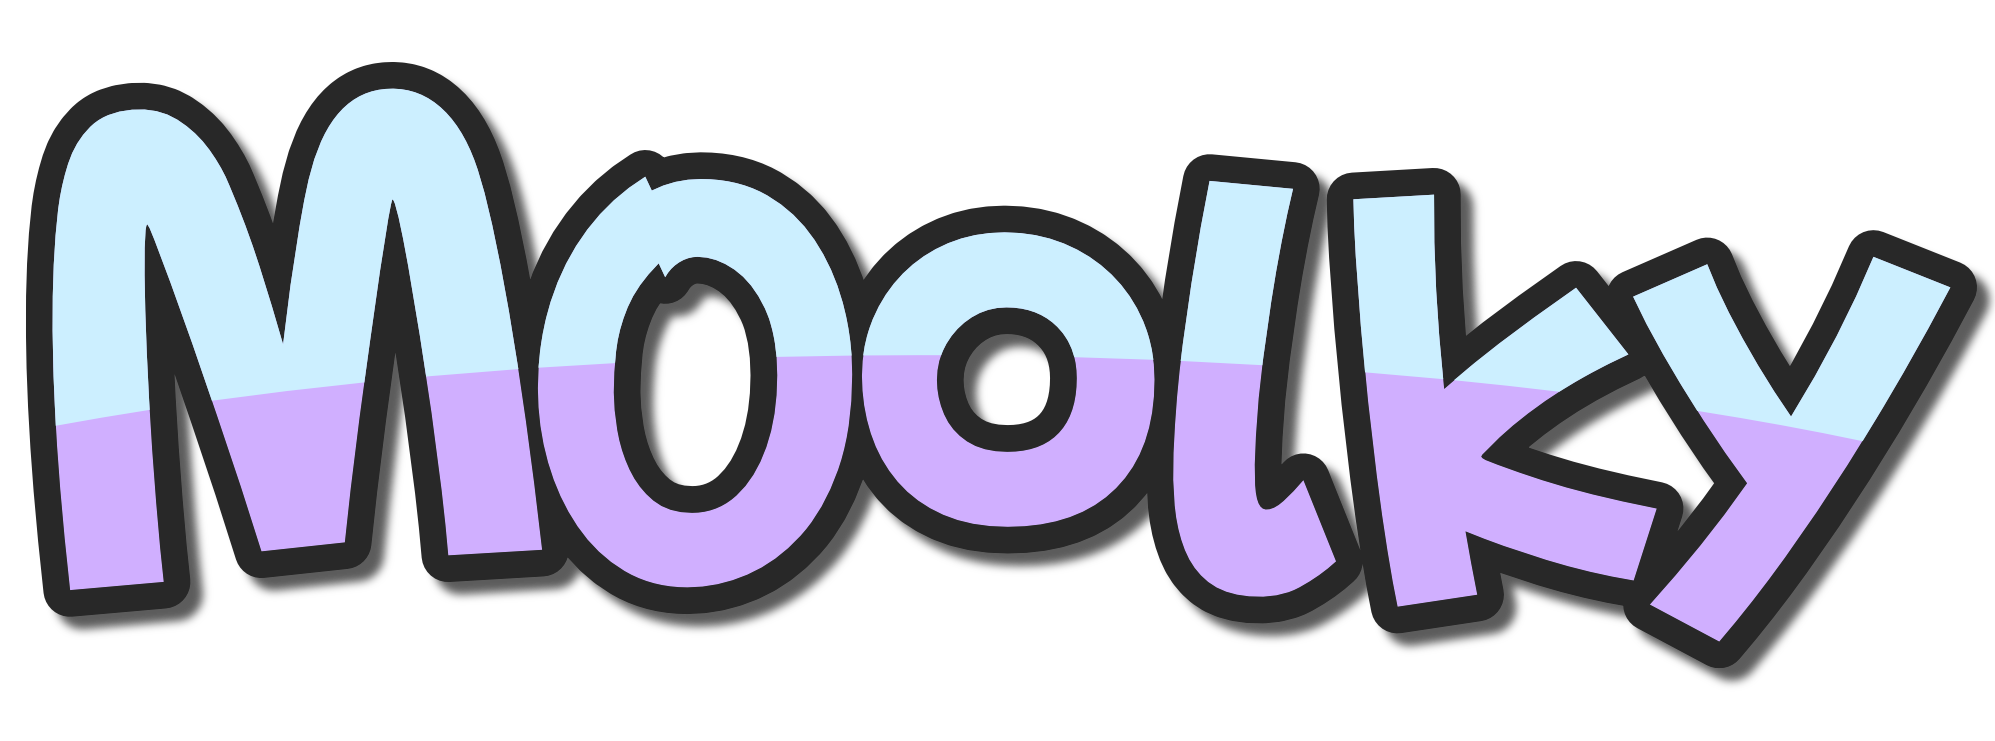 M0-OLKY-logo-text-purple.png